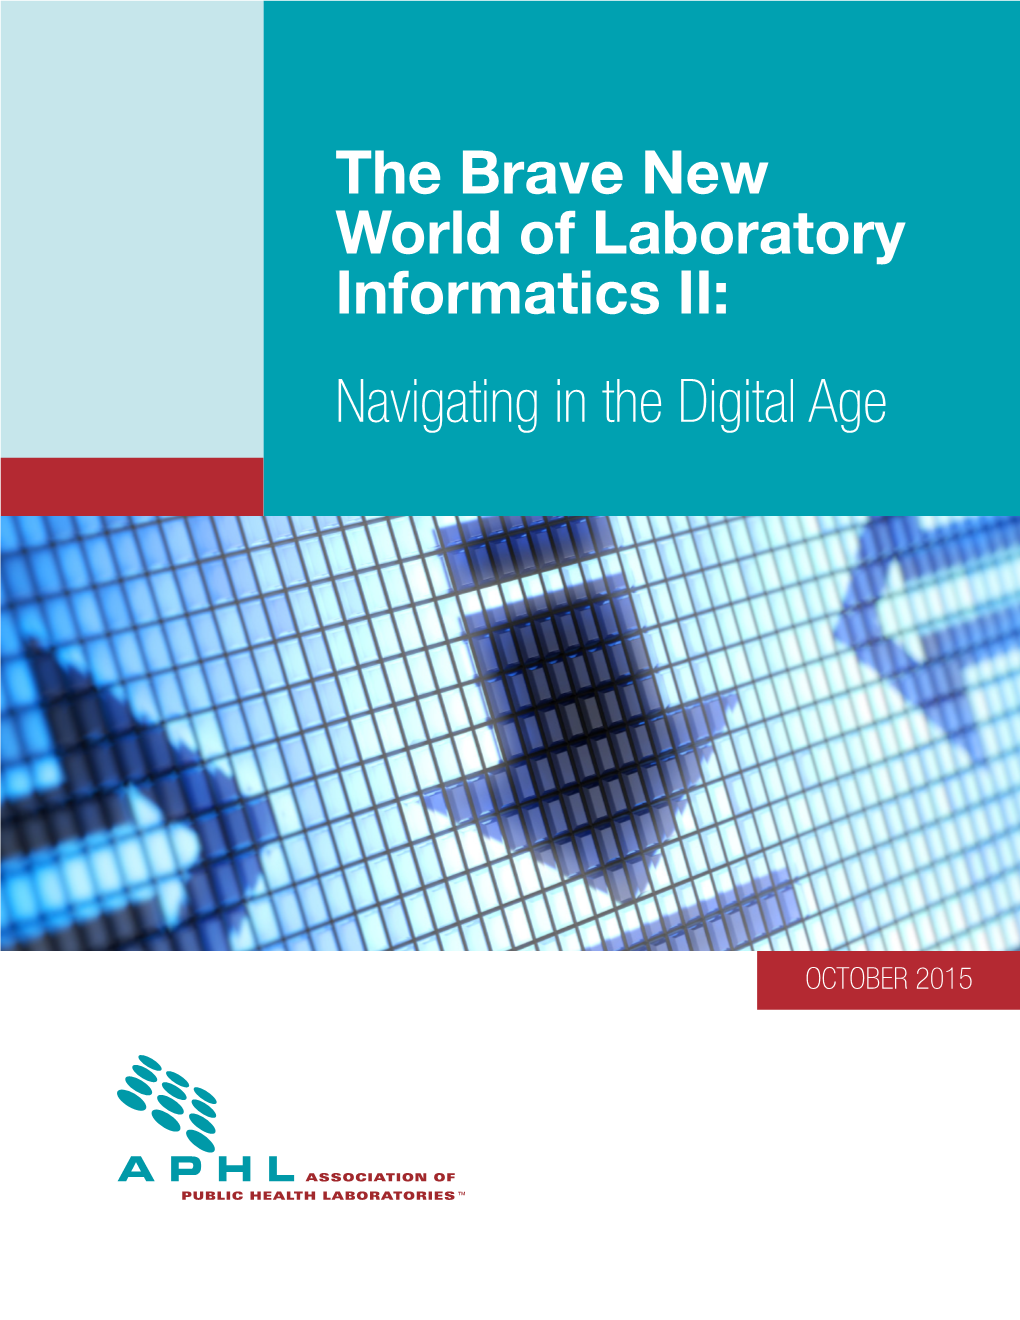 The Brave New World of Laboratory Informatics II: Navigating in the Digital Age